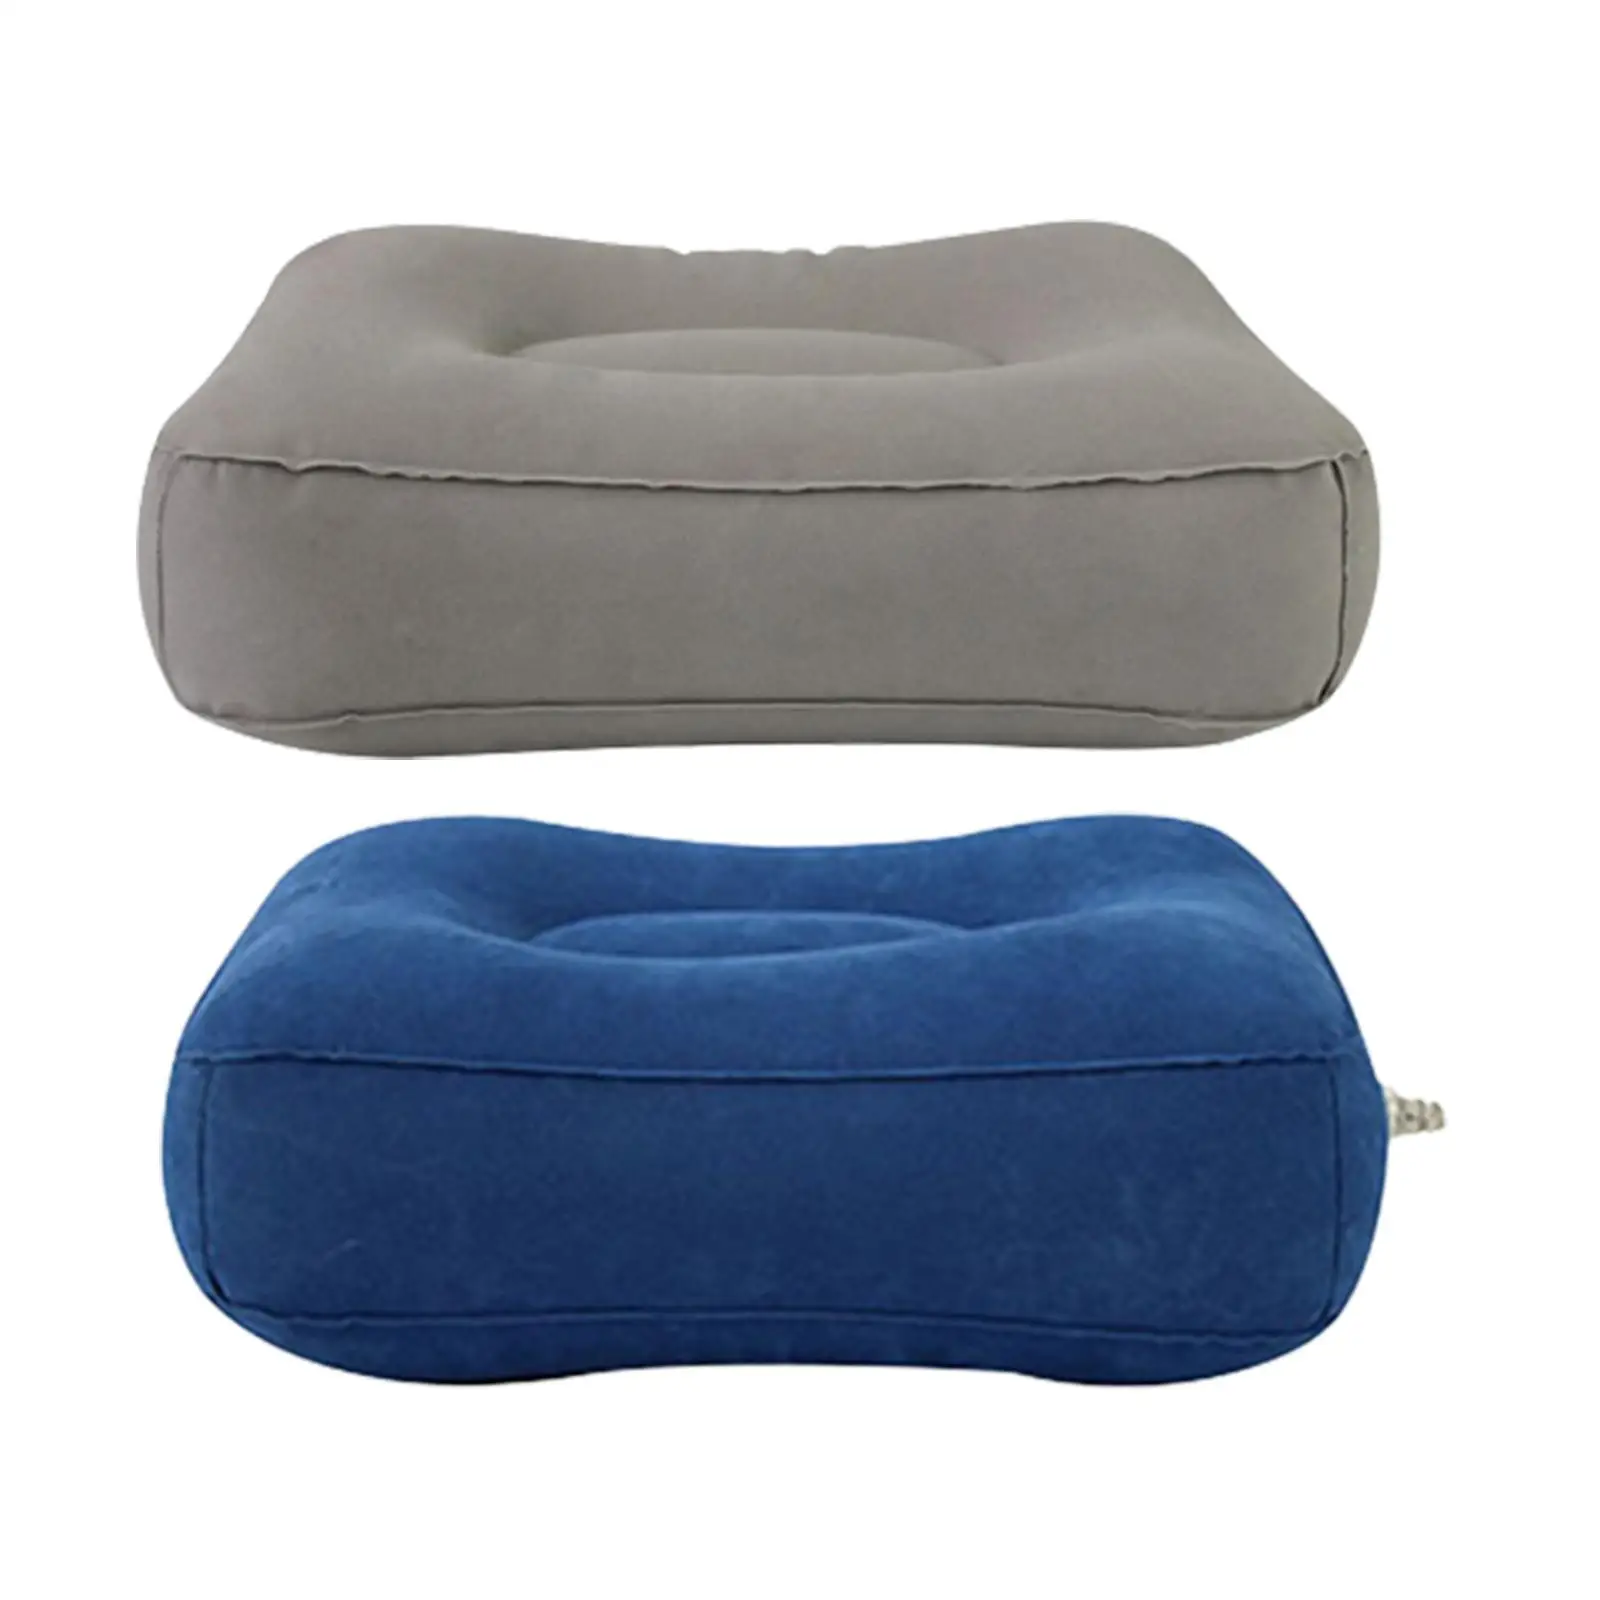 PVC Inflatable Flocking Foot Rest Pillow Inflatable Stool Ottoman for Office Airplane Camping Camping Mat 42x32x20cm